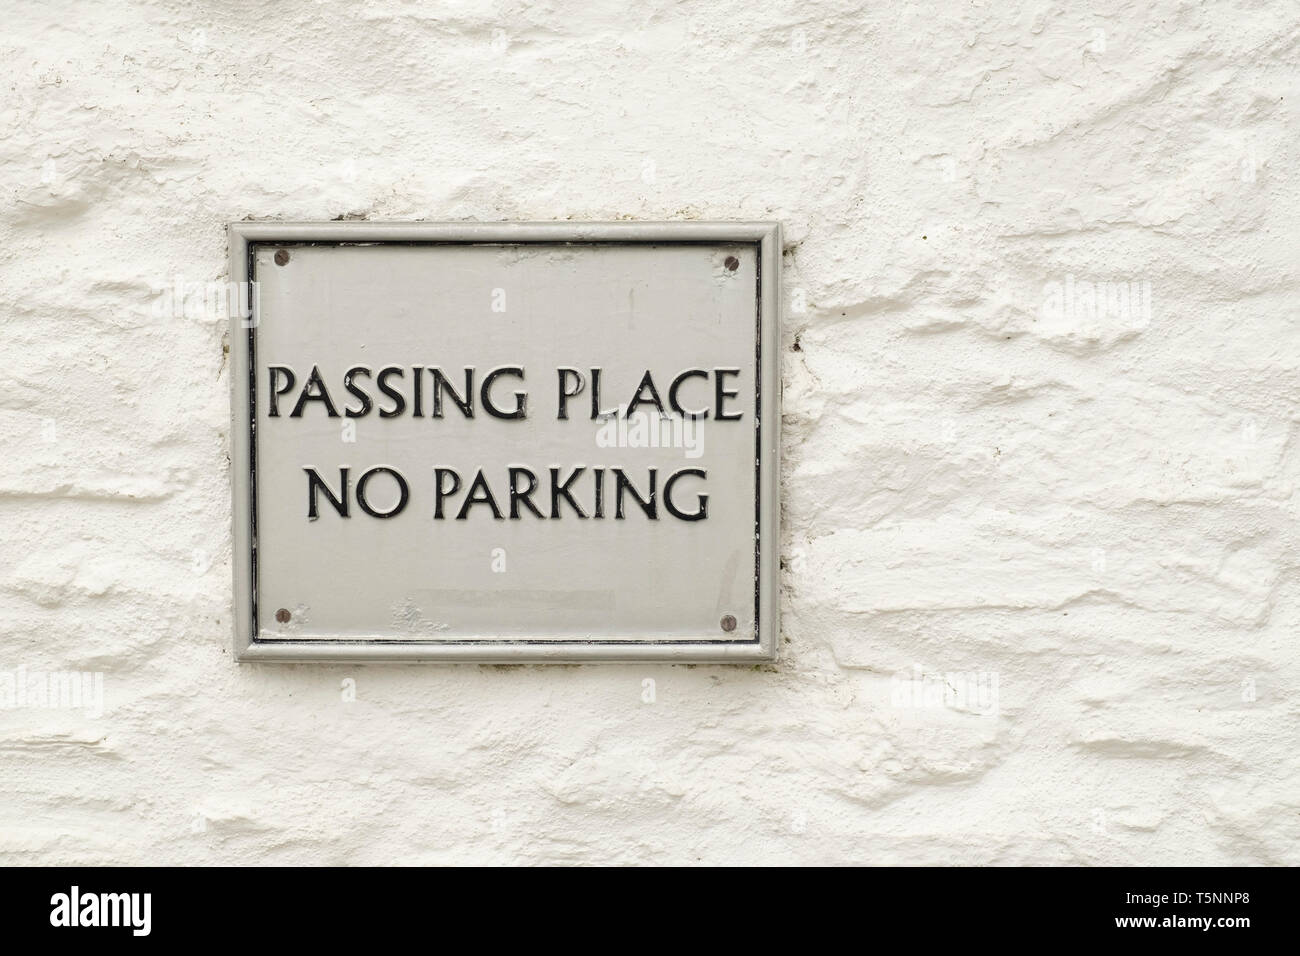 No parking sign and Passing place sign, on wall in Durgan village, Cornwall, England Stock Photo